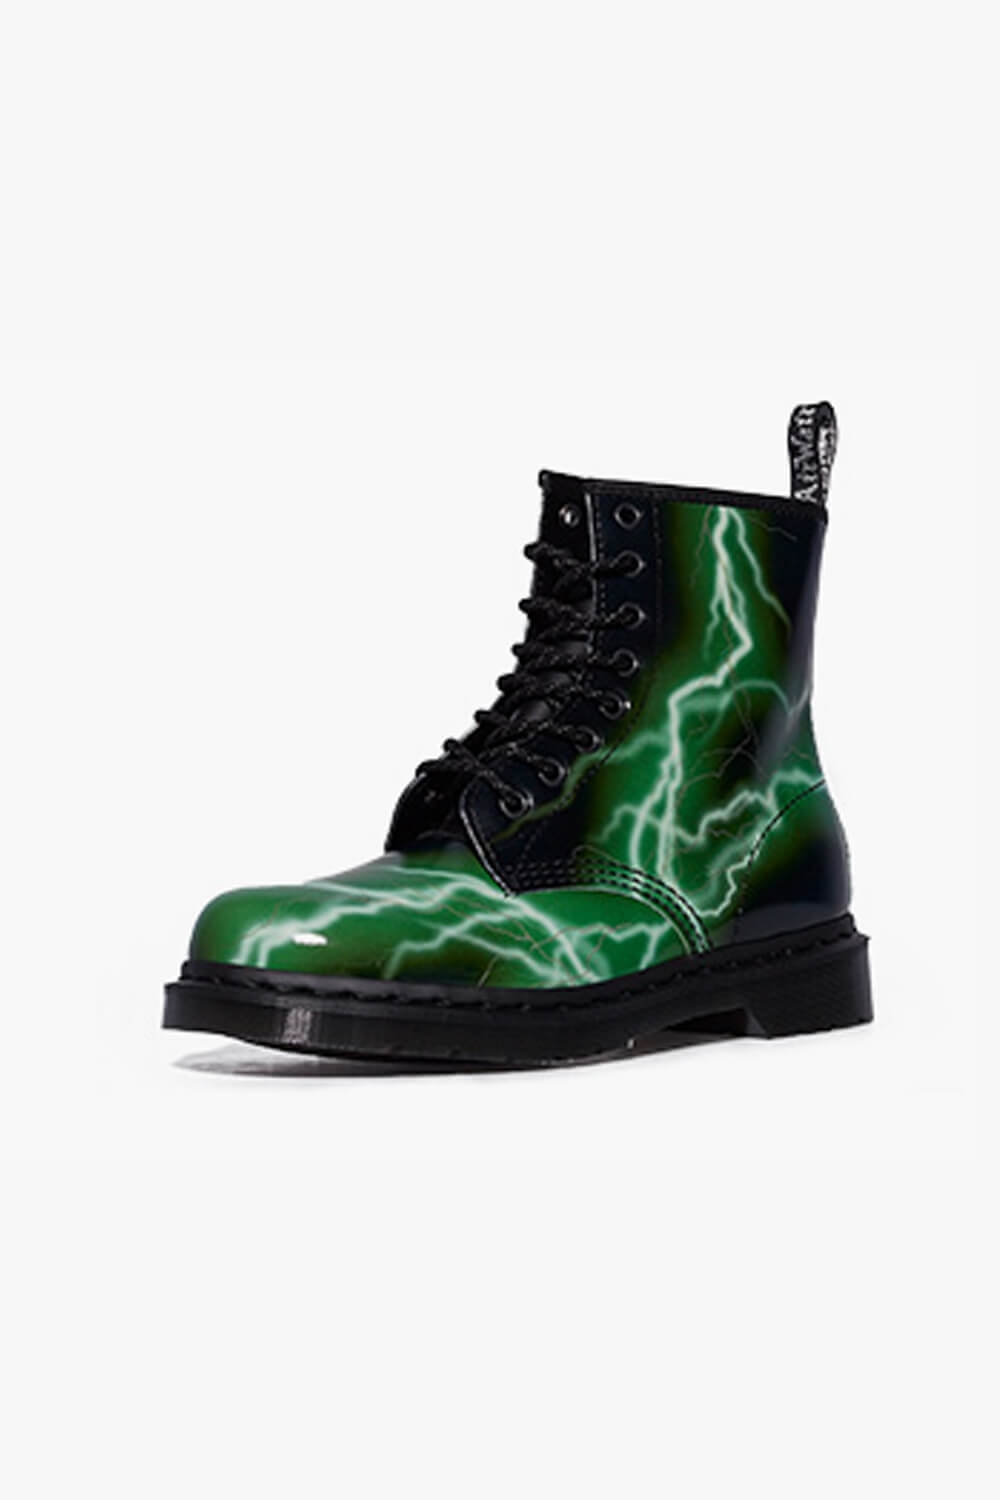 Dr Martens Green Lightning Boots - Aesthetic Clothes Shop